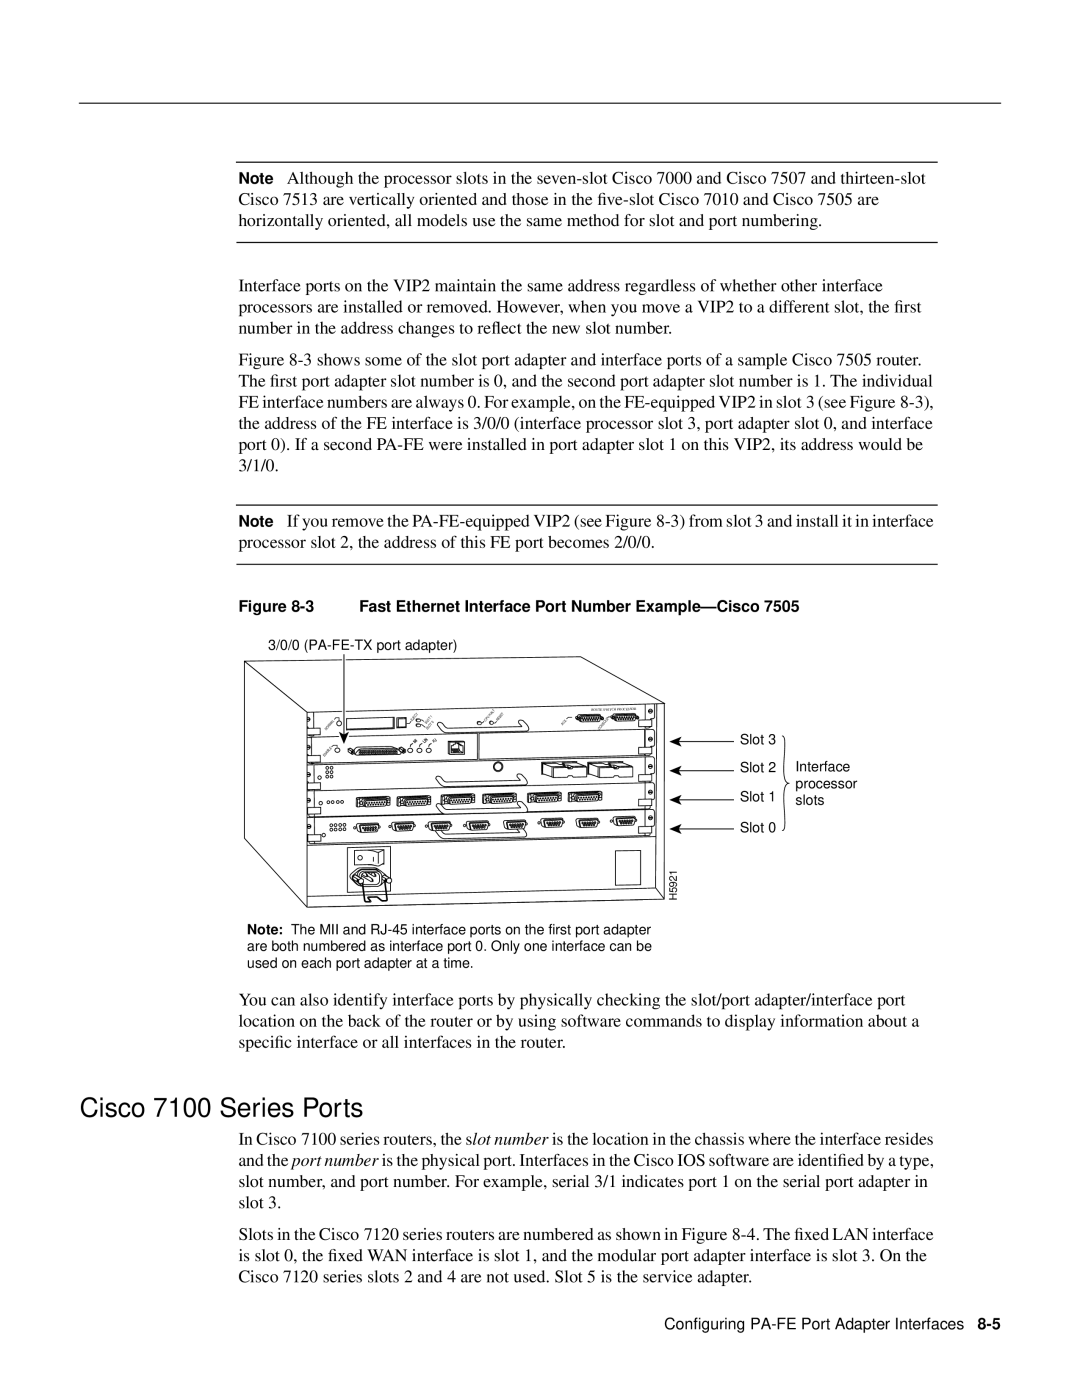 Cisco Systems PA-FE-FX, PA-FE-TX manual Cisco 7100 Series Ports, 3 Fast Ethernet Interface Port Number Example-Cisco 